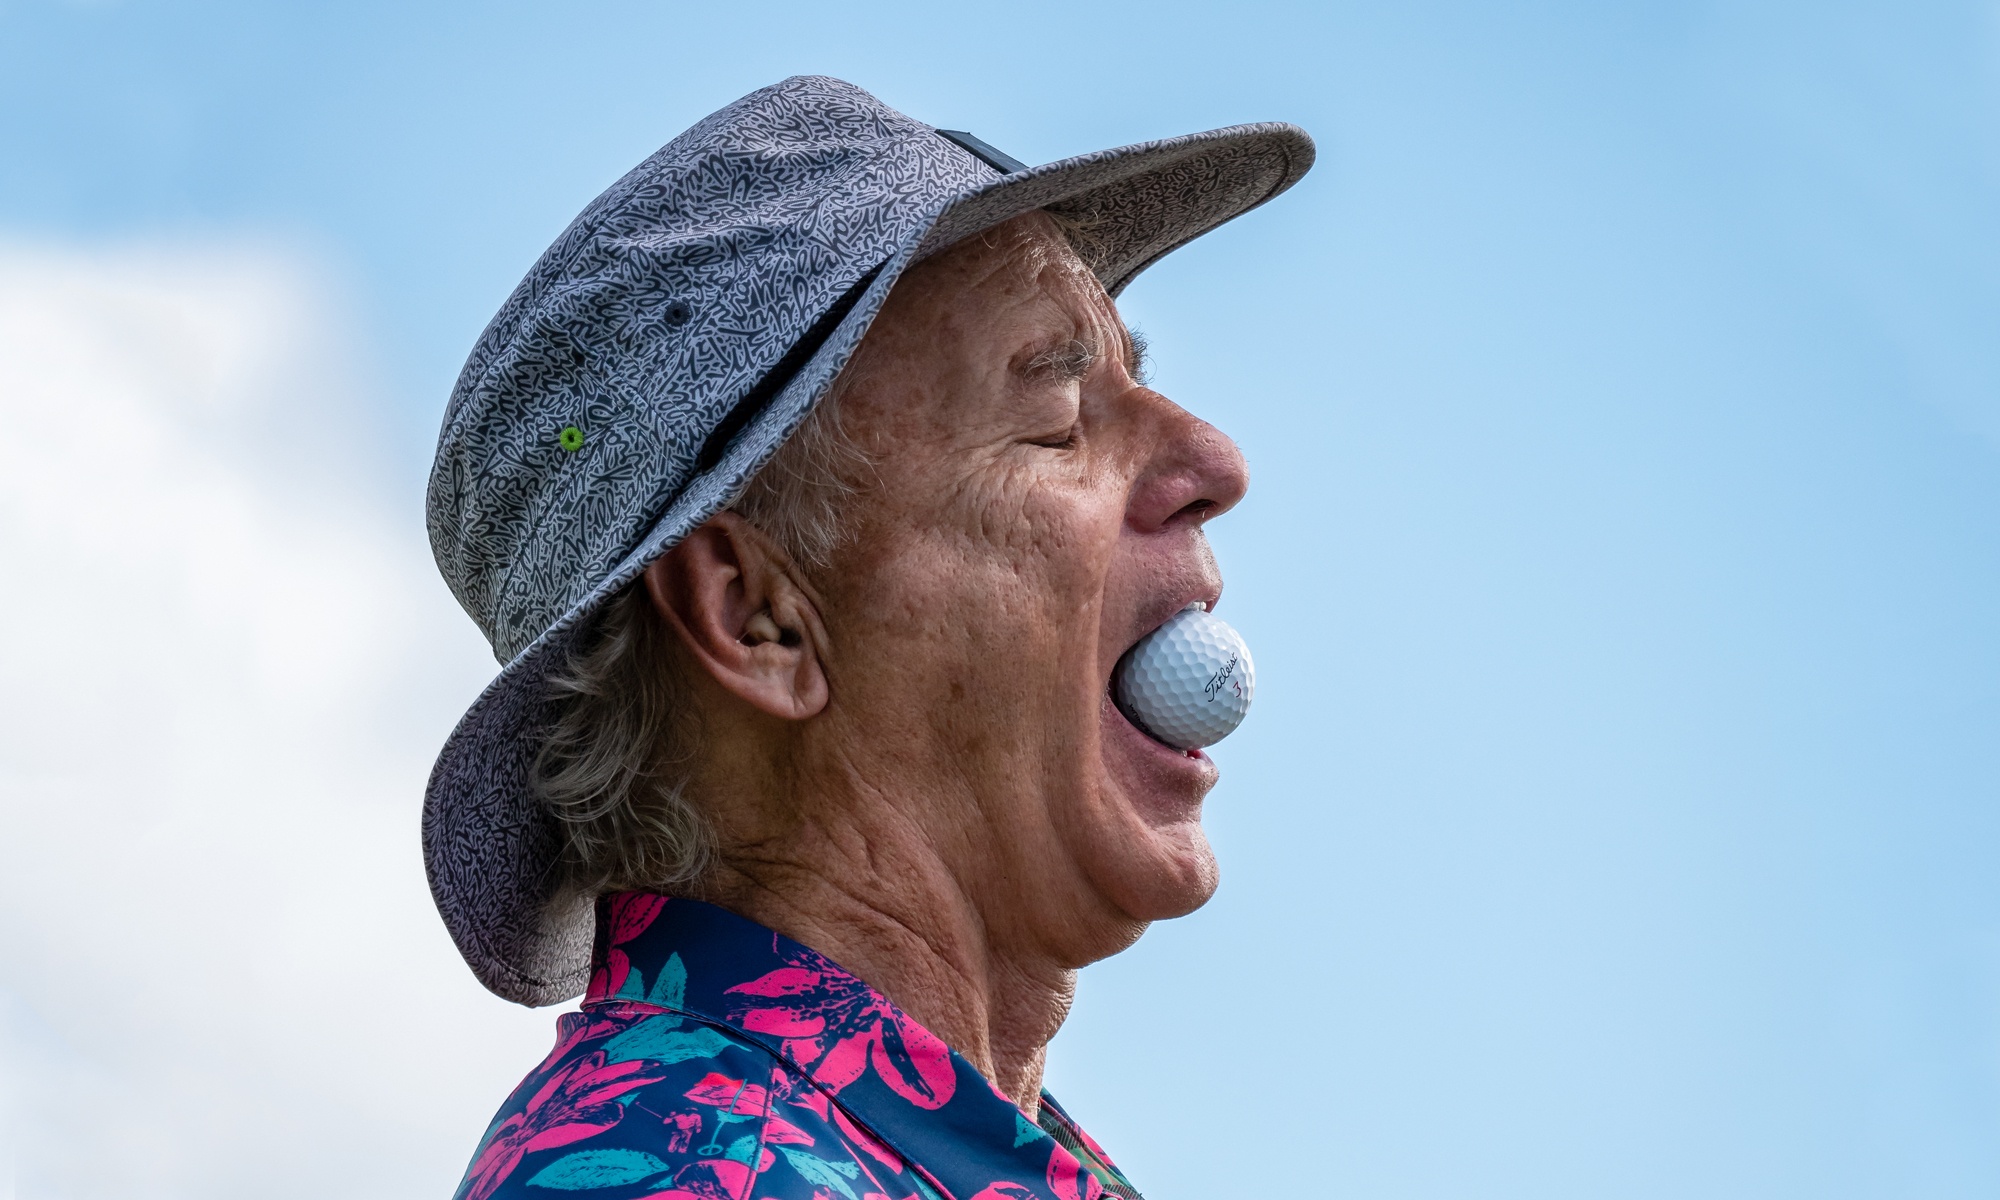 Spice Up Your Swing with Bill Murray's New Golf Apparel Line - The